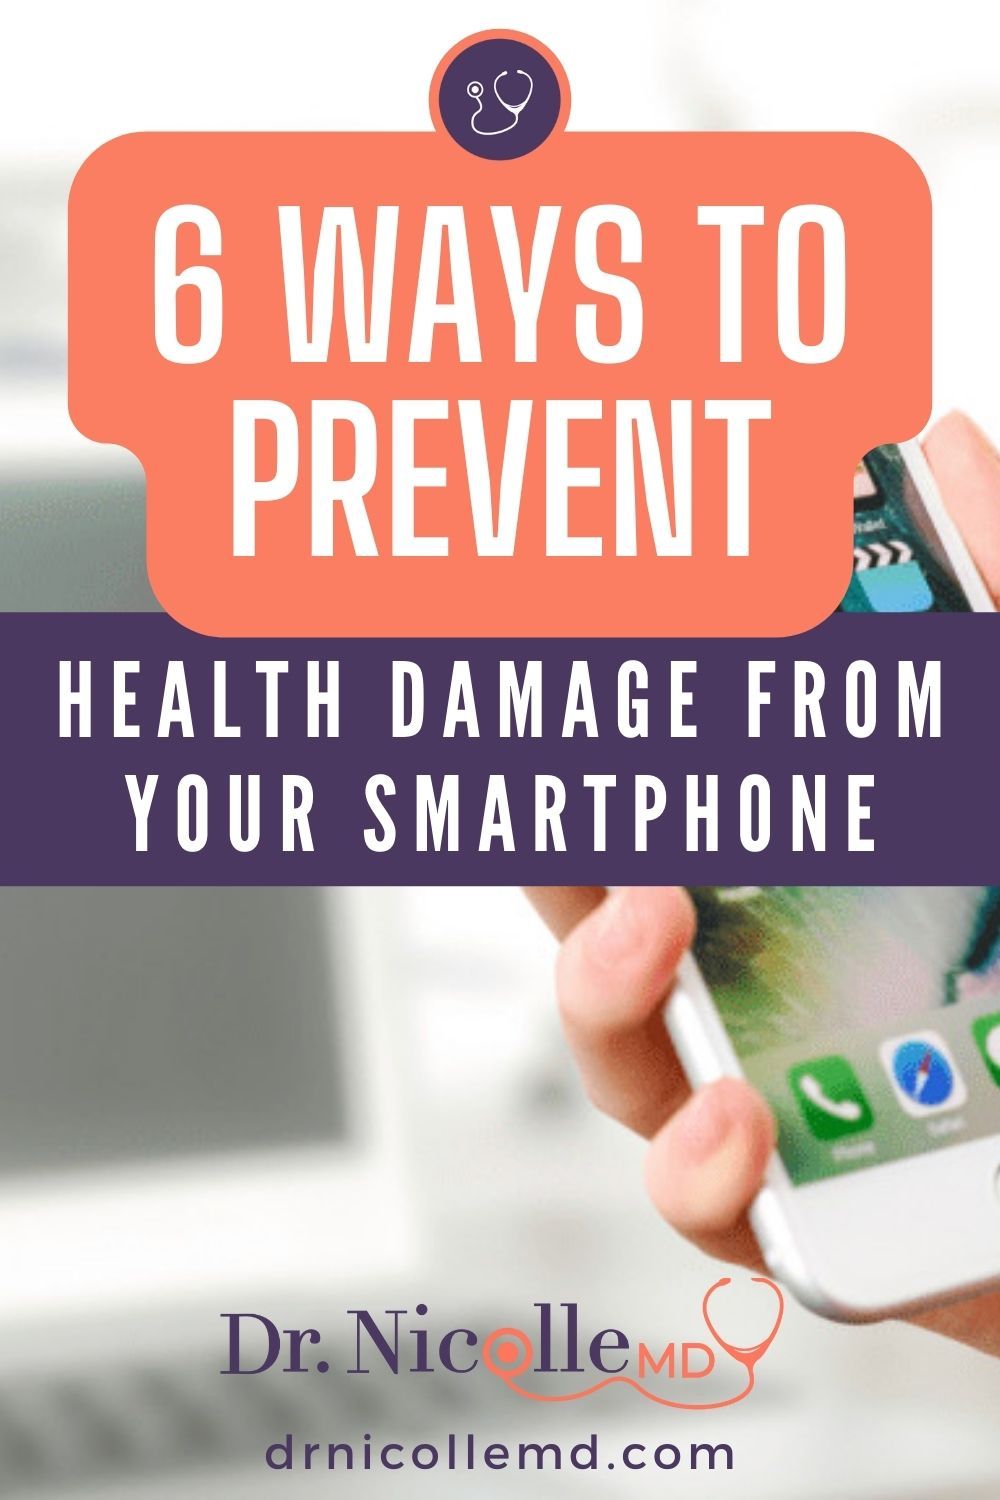 6 Ways to Prevent Health Damage from Your Smartphone